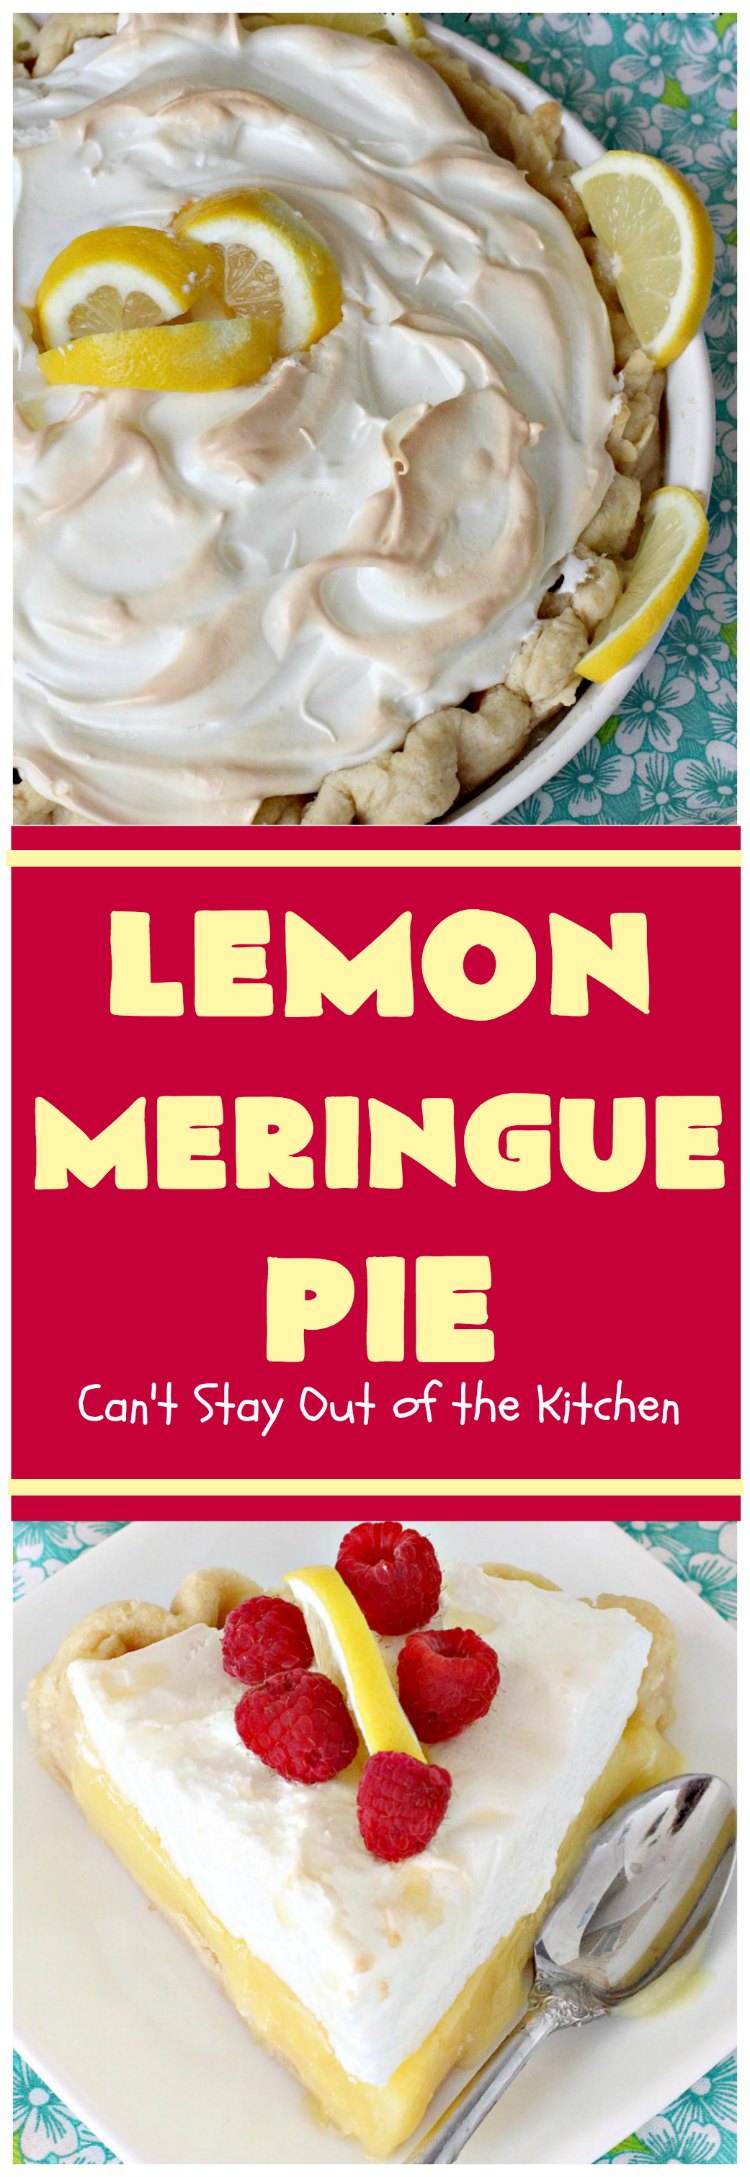 Lemon Meringue Pie - Can't Stay Out of the Kitchen